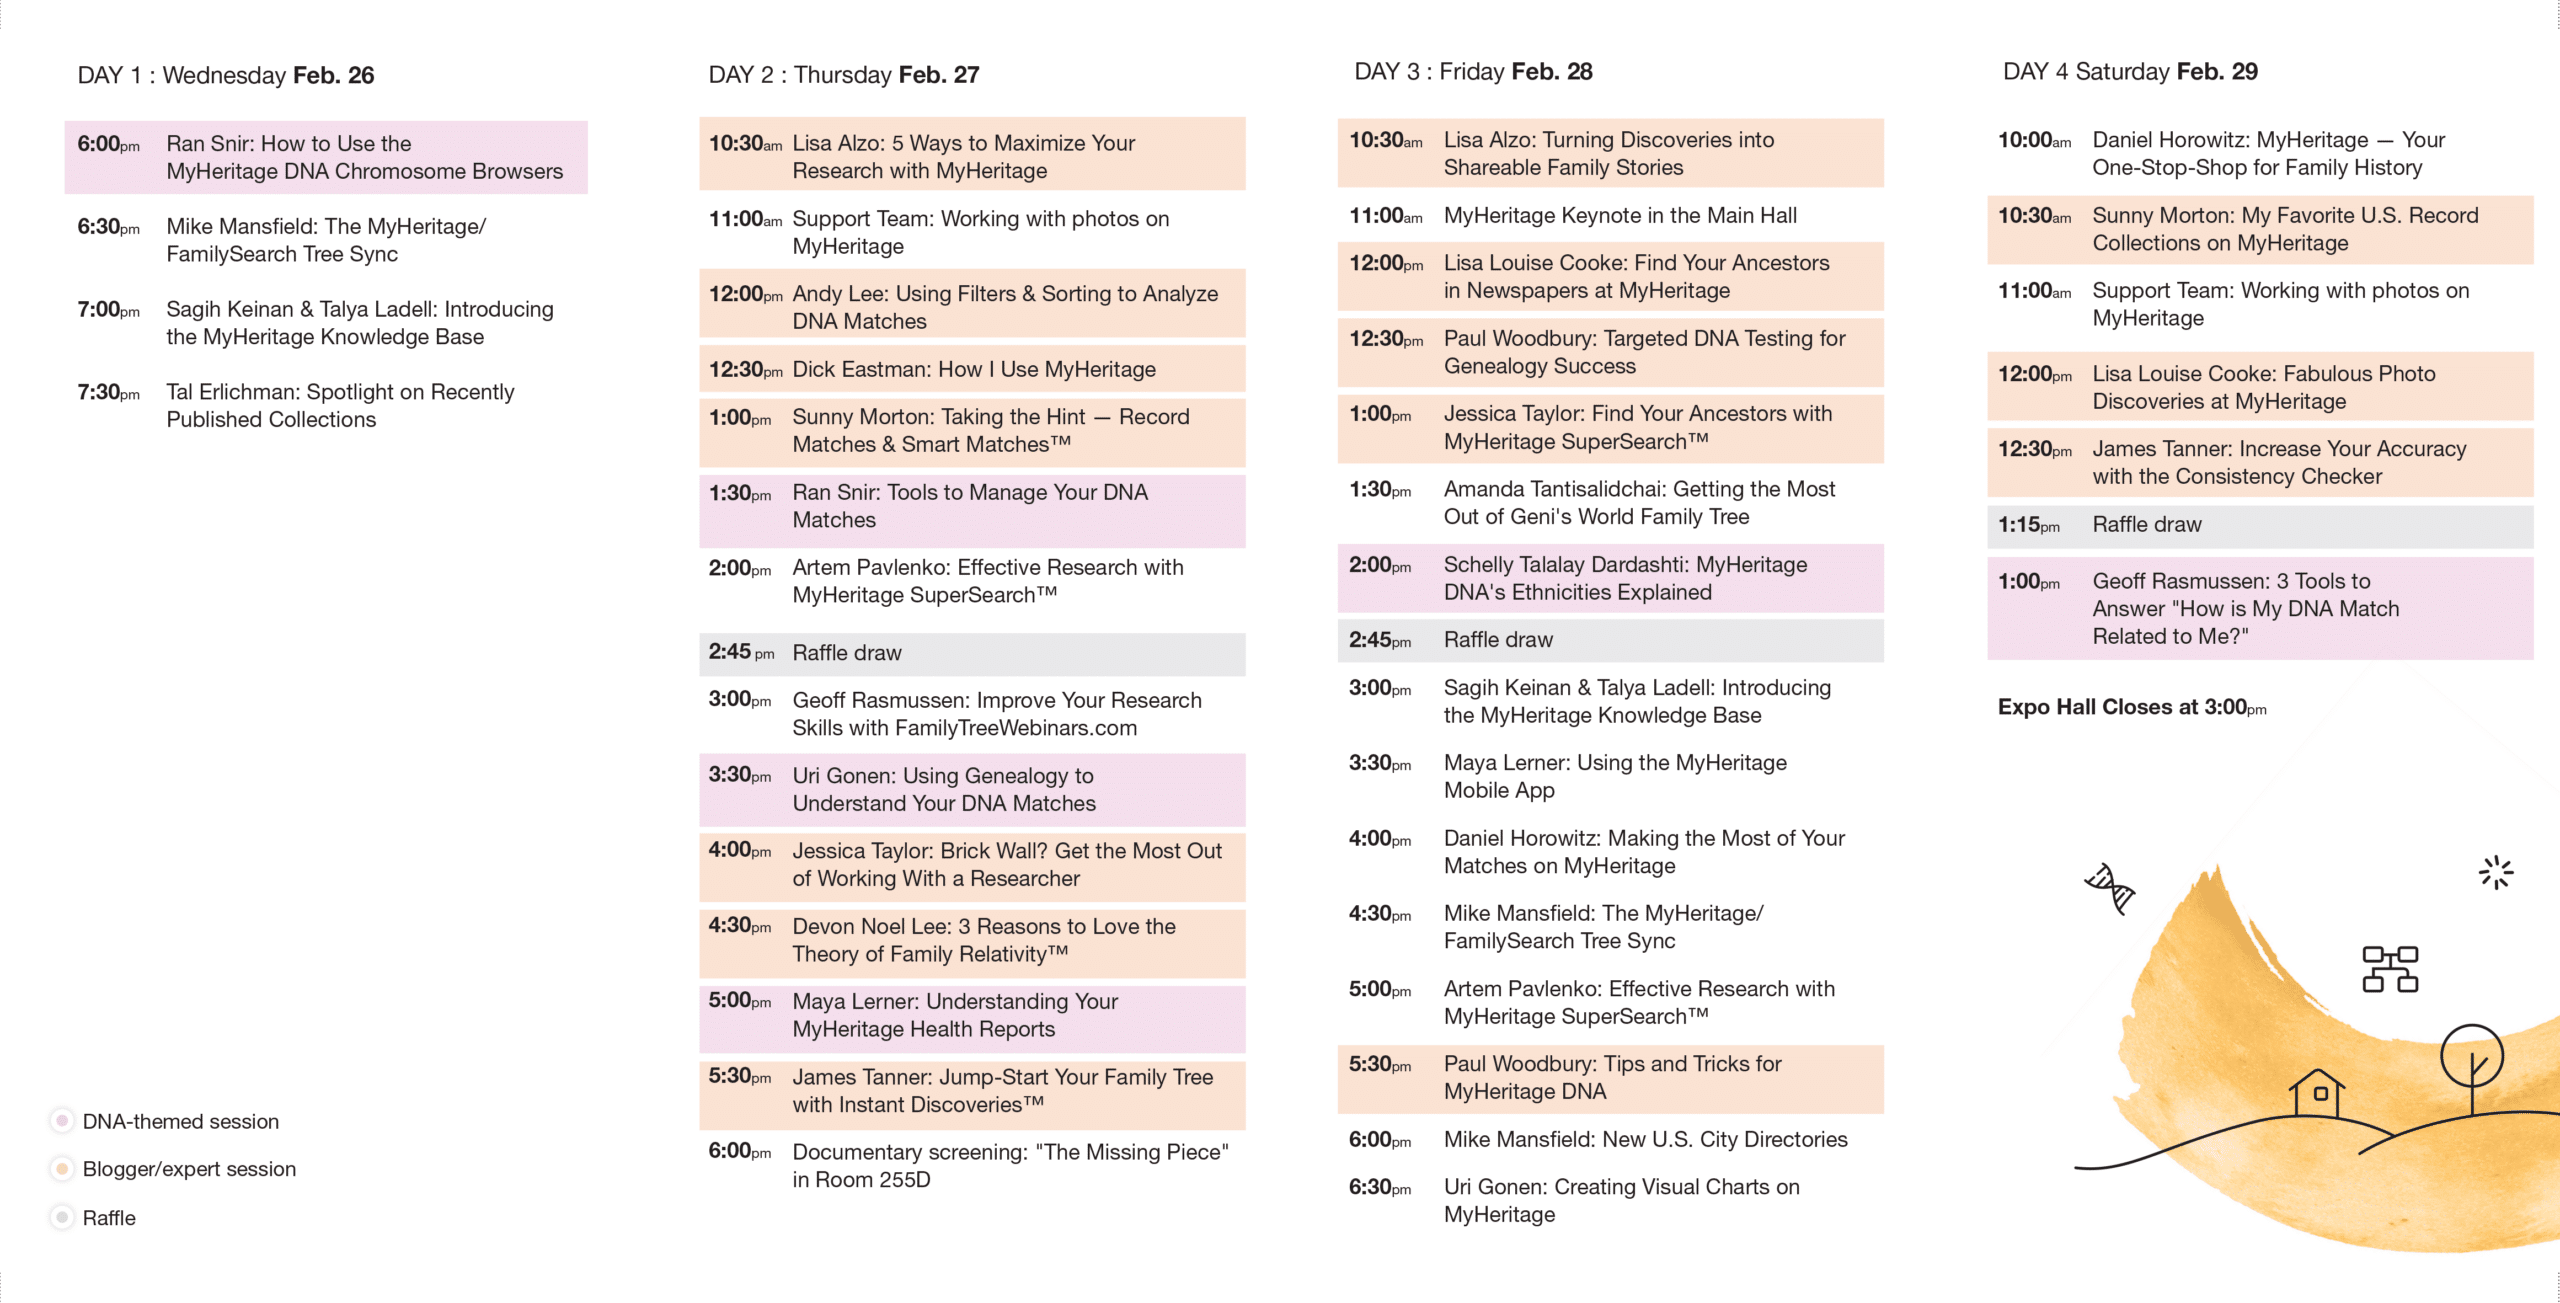 Full demo booth lecture schedule (click to zoom)